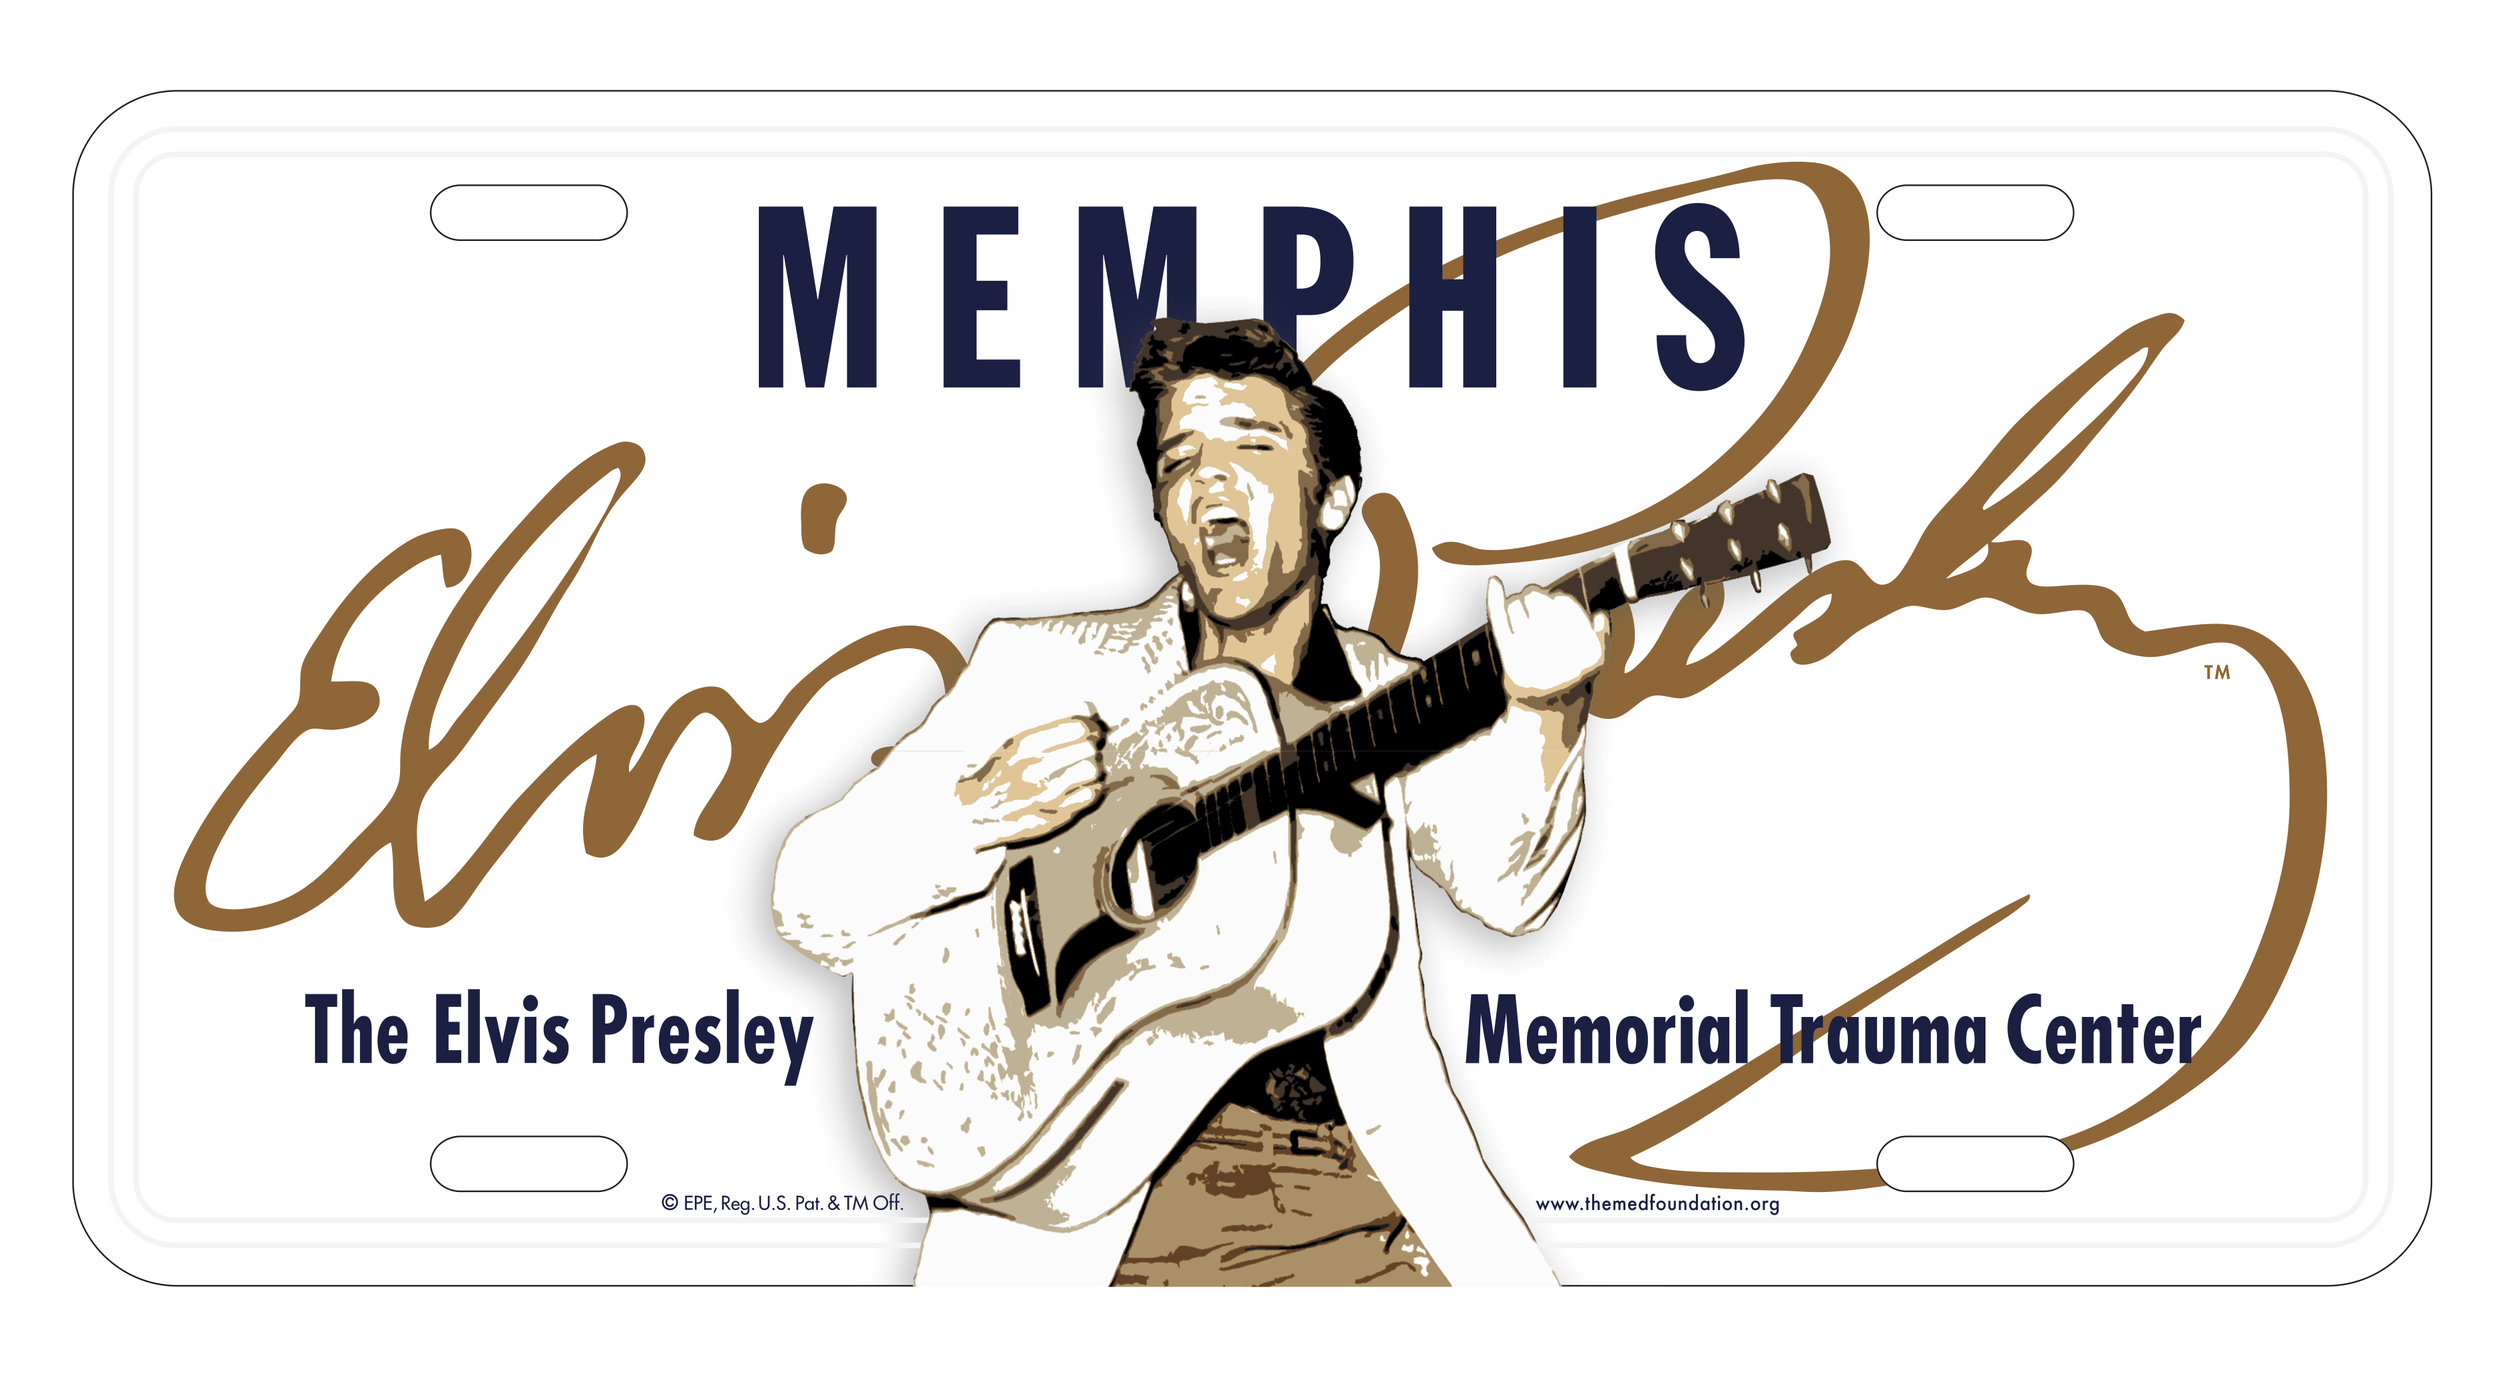  Retail specialty front plate benefitting The Elvis Presley Trauma Center (not official plate)  Branding creative and design by Chuck Mitchell 